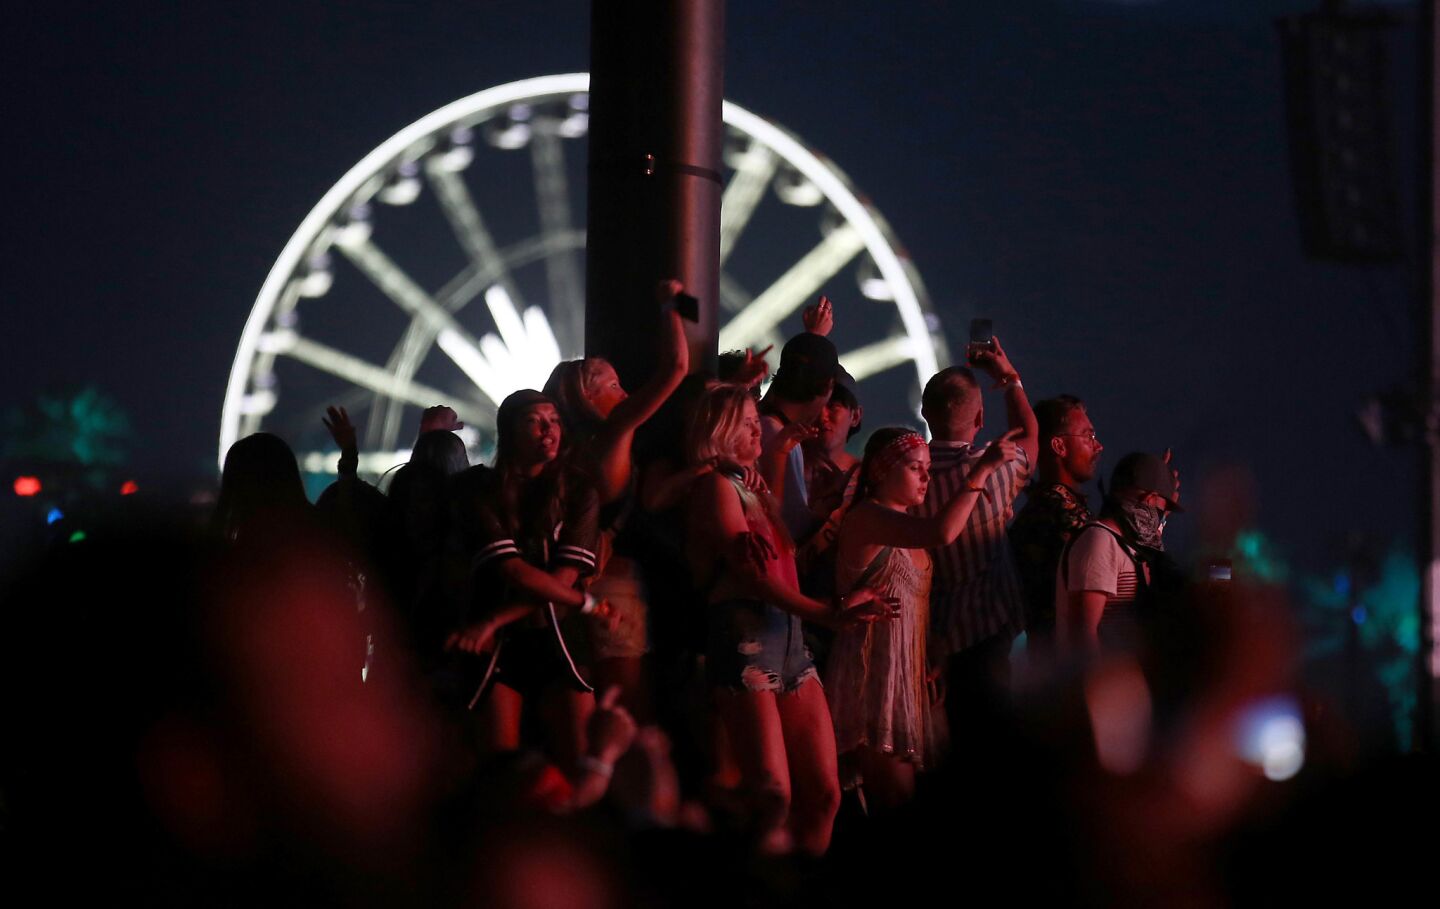 INDIO, CALIF. - APRIL 15, 2017. Fans dance to the music of Future at the Coachella Stage on day two of the Coachella Music and Arts Festival in Indio on Saturday, April 15, 2017. (Luis Sinco/Los Angeles Times)